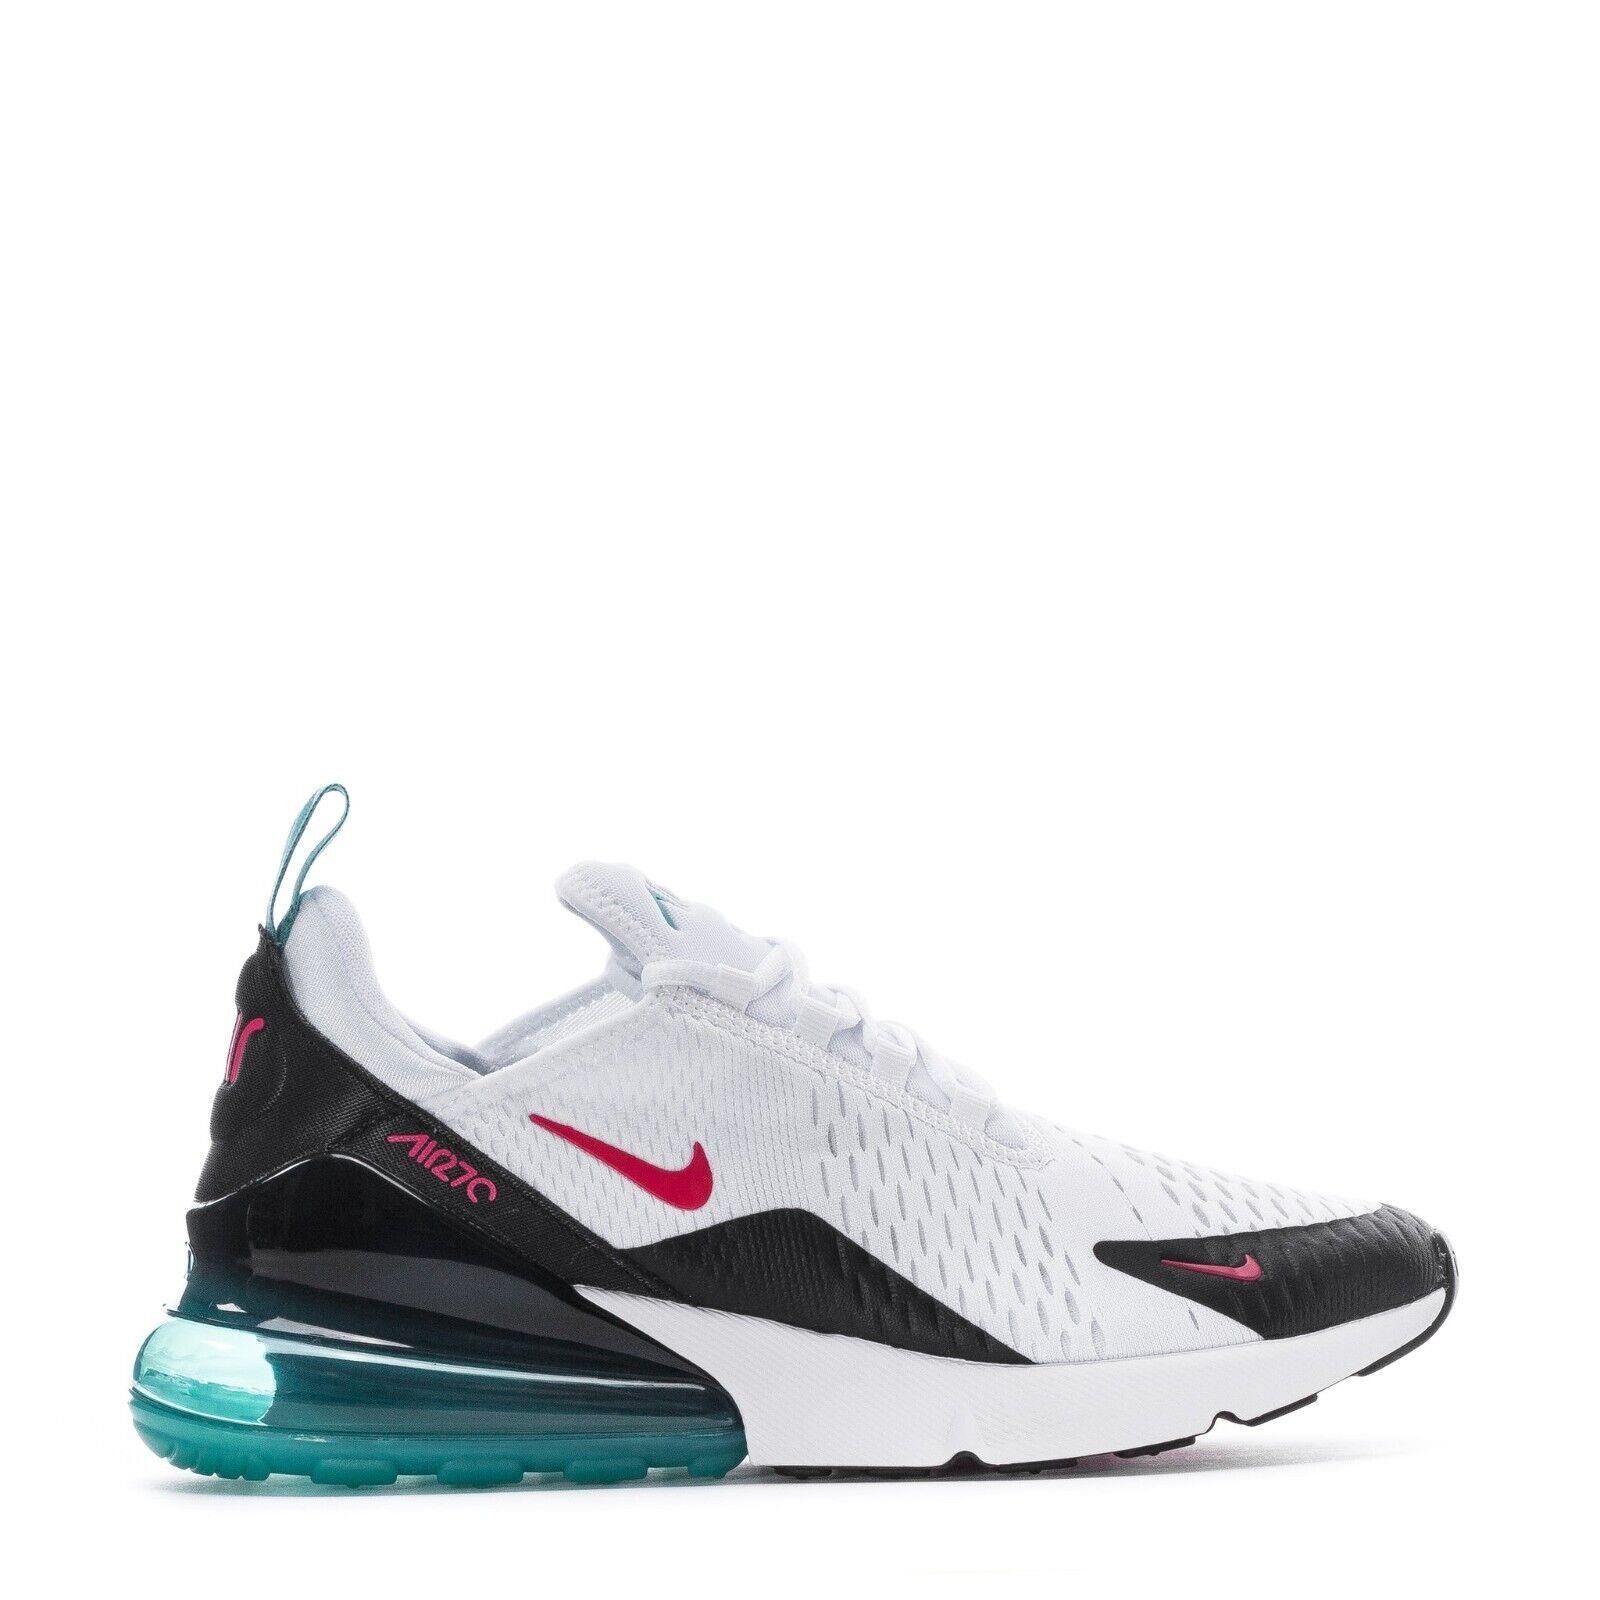 Mens Nike Air Max 270 DR9876-100 White/rush Pink/washed Teal/black Shoes - Multicolor